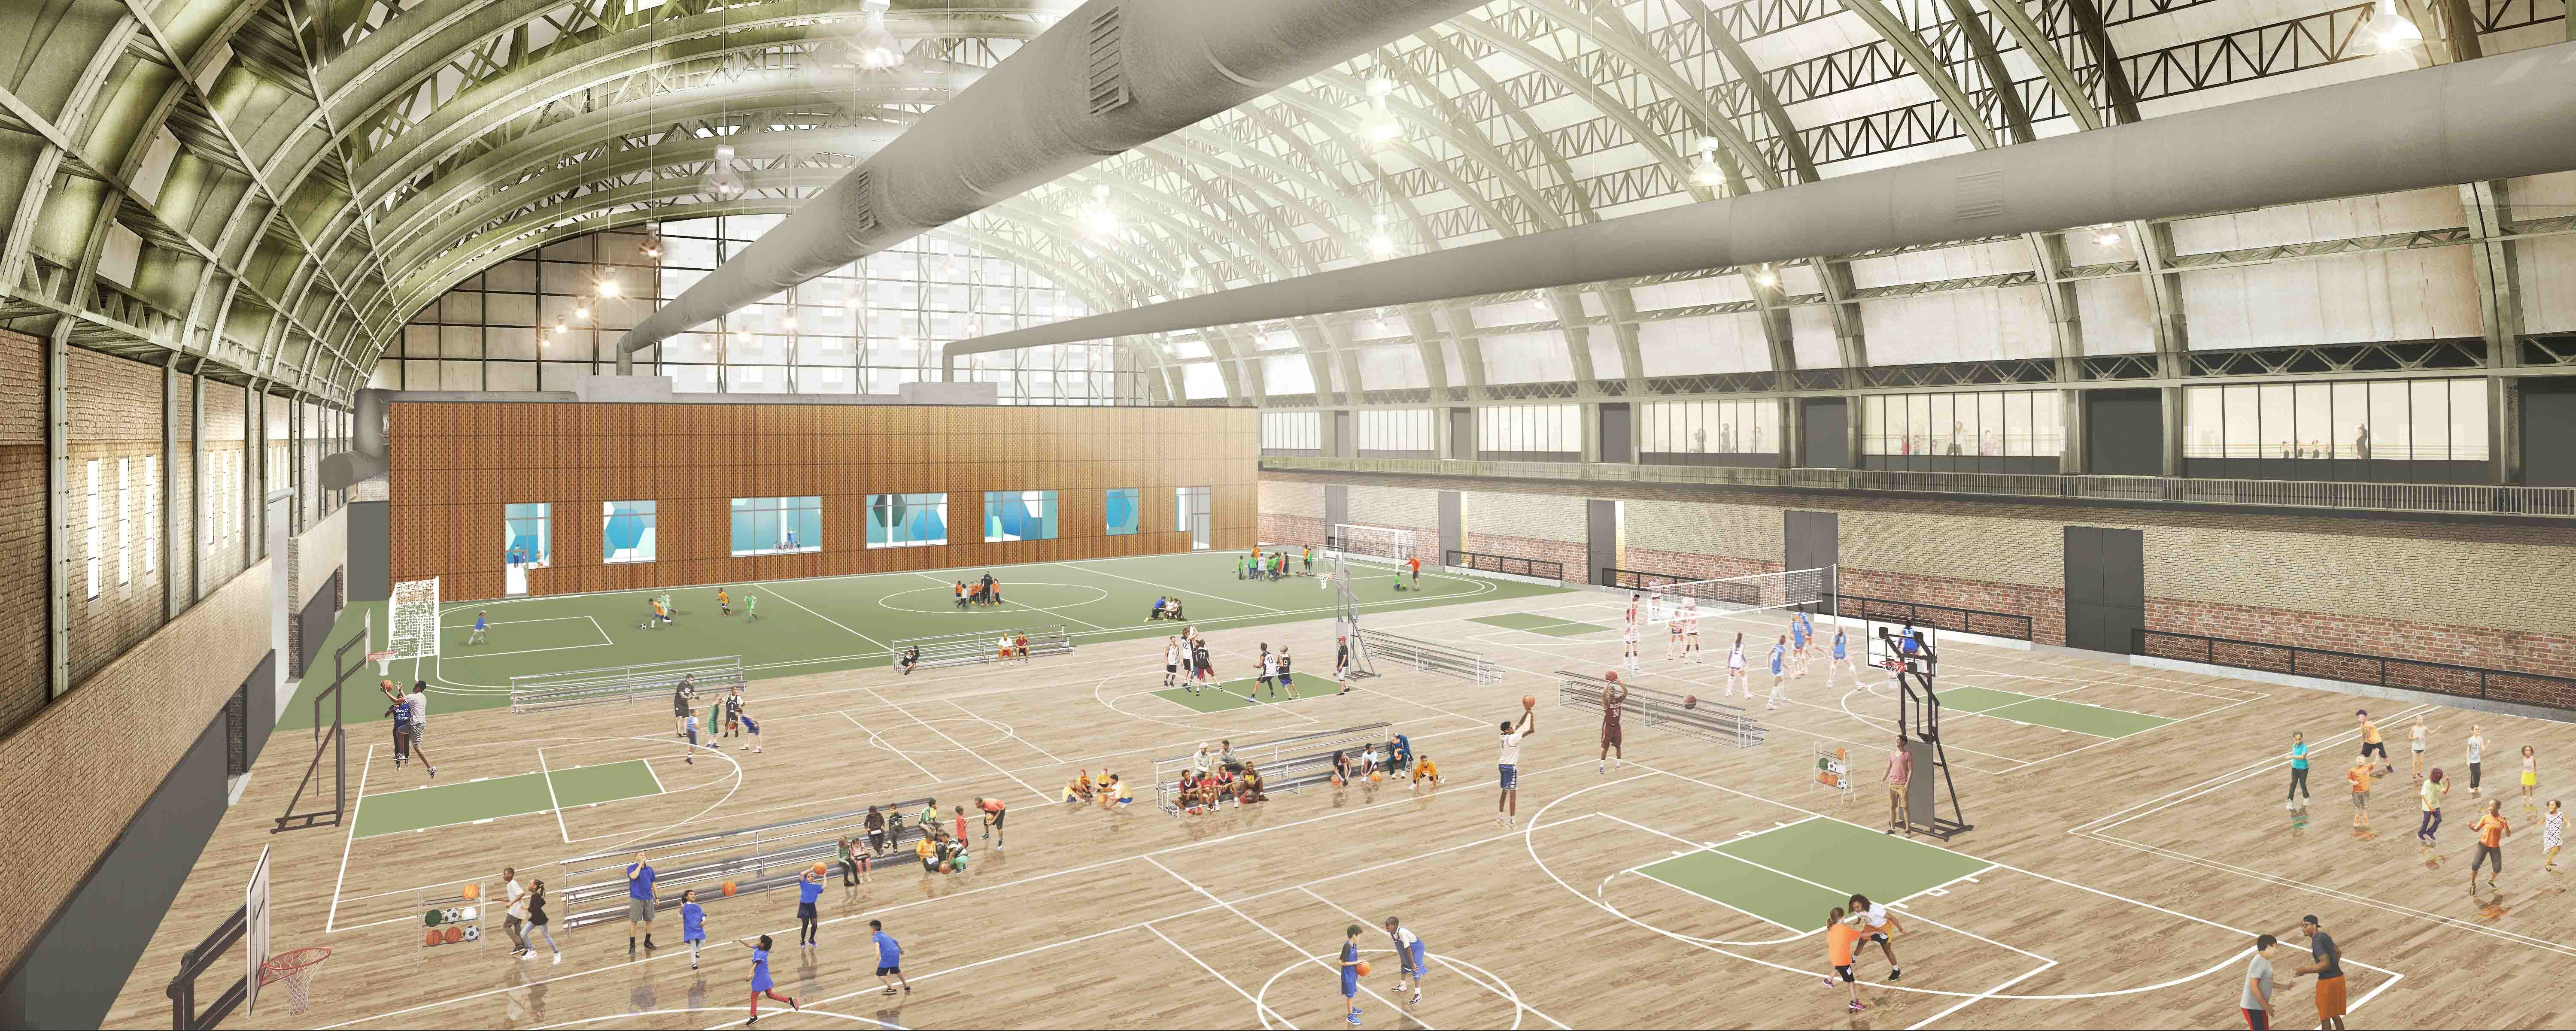 Interior rendering of Bedford Union Armory recreational